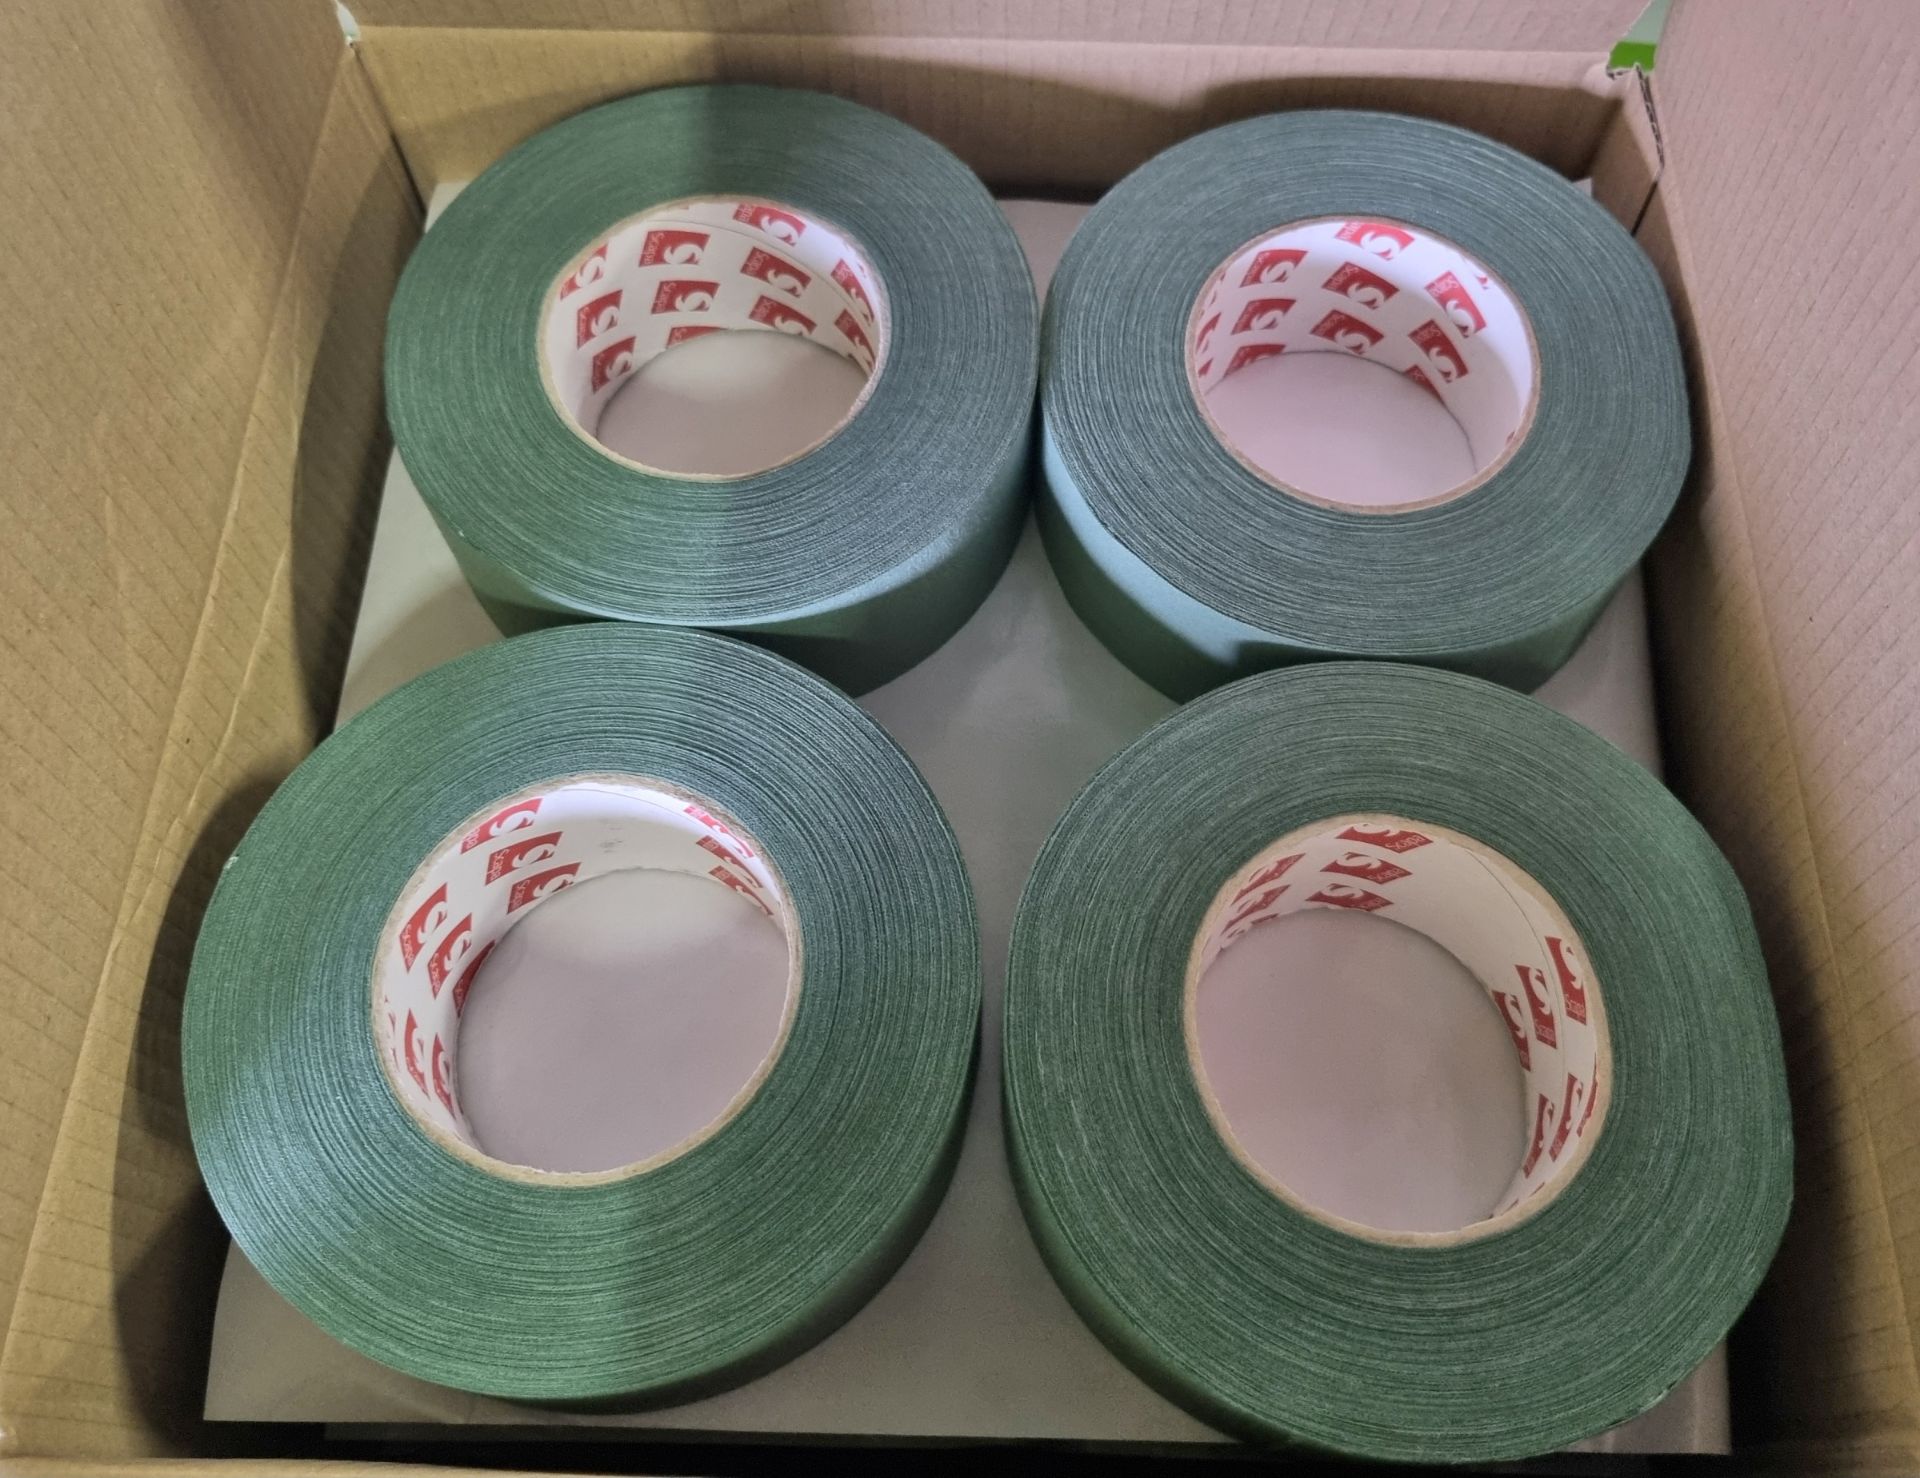 2x boxes of Scapa 3302 uncoated cotton cloth adhesive tape - olive green - 50mm x 50m - Image 4 of 4